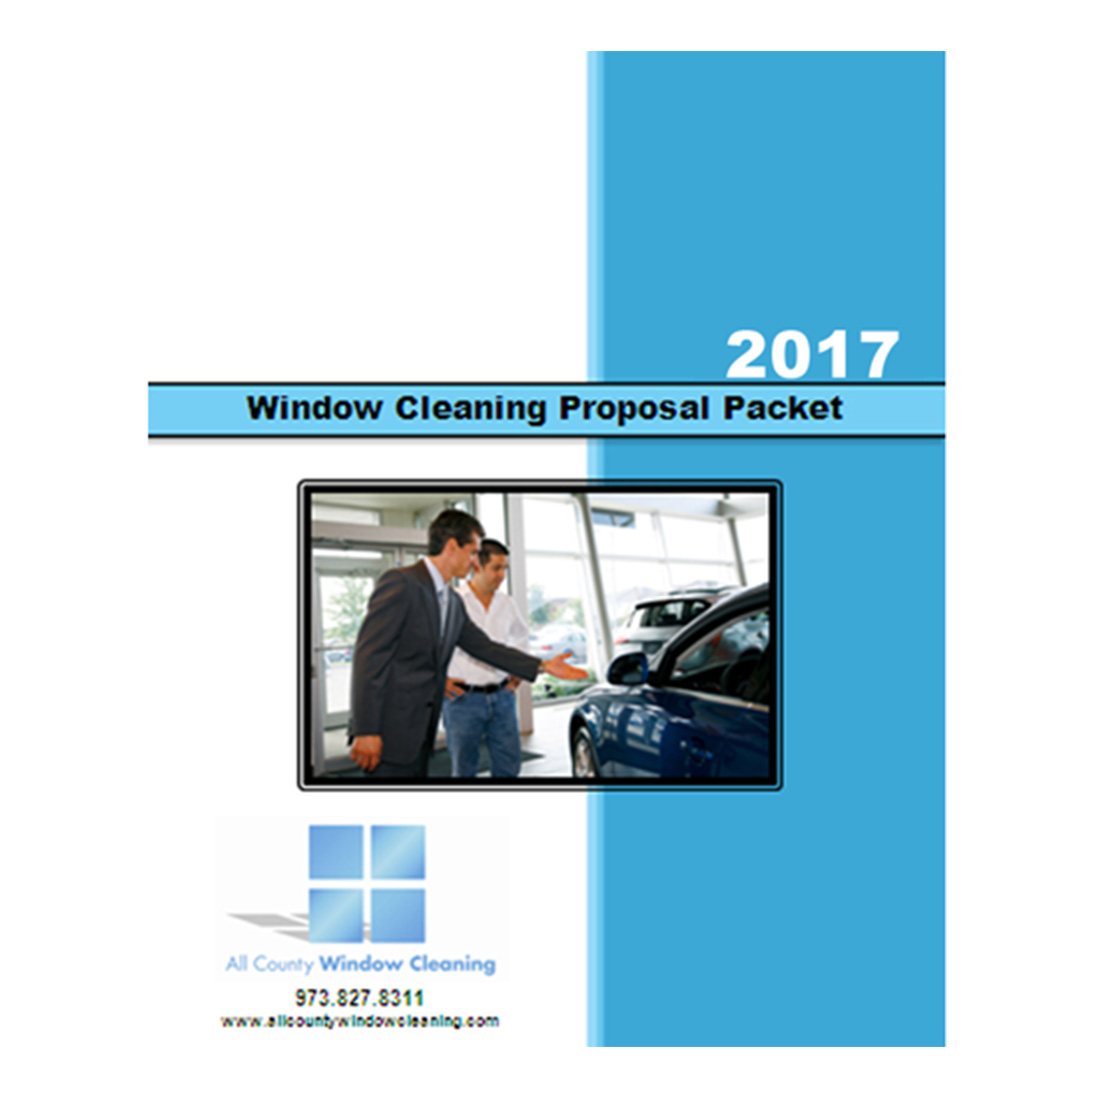 Car Dealership - Window Cleaning Proposal Packet - Front View